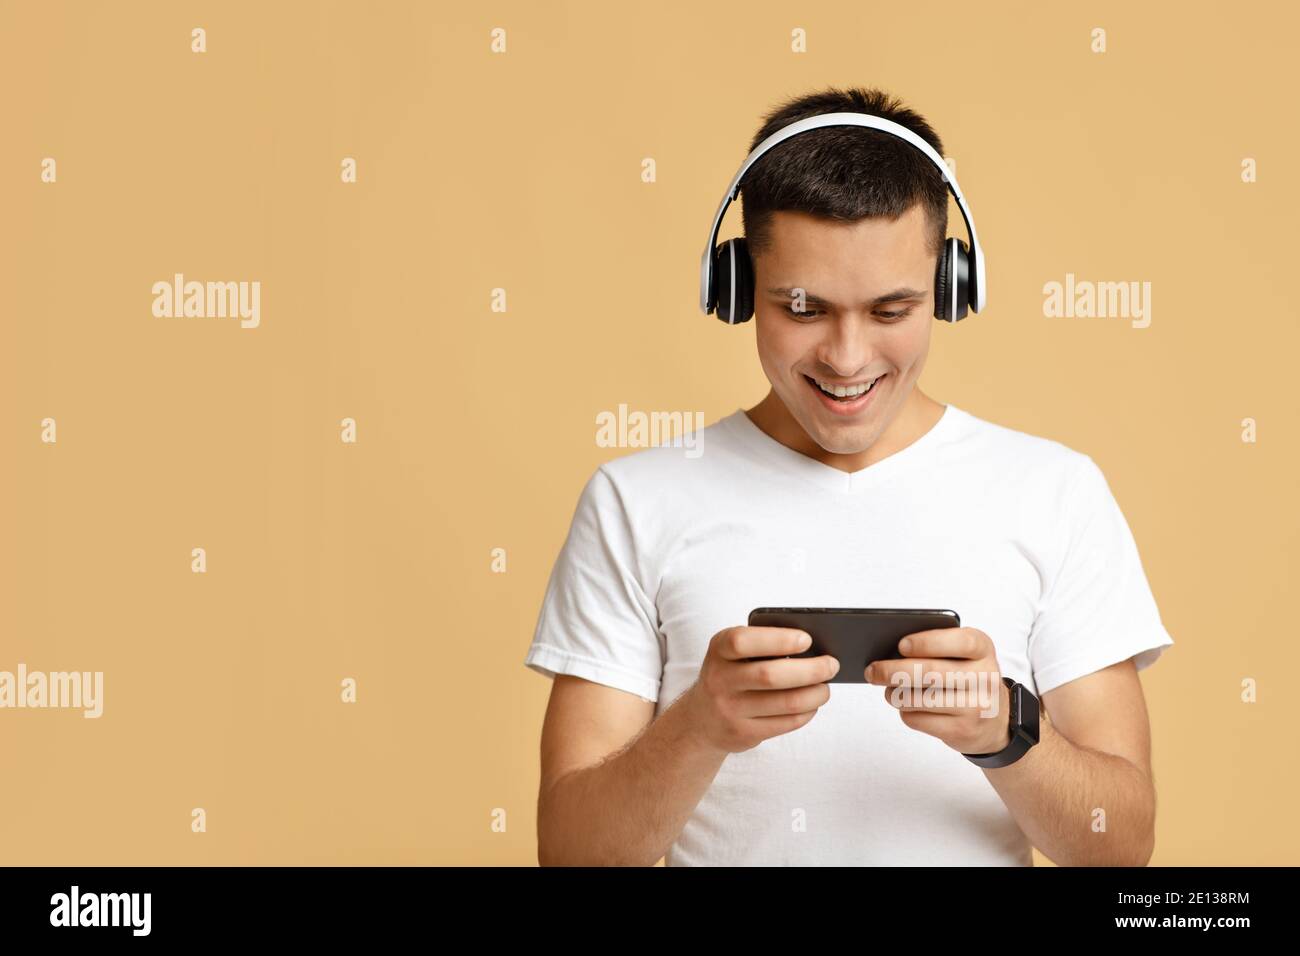 Entertainment and online games for teenagers. Cheerful cute millennial guy in modern wireless headphones Stock Photo